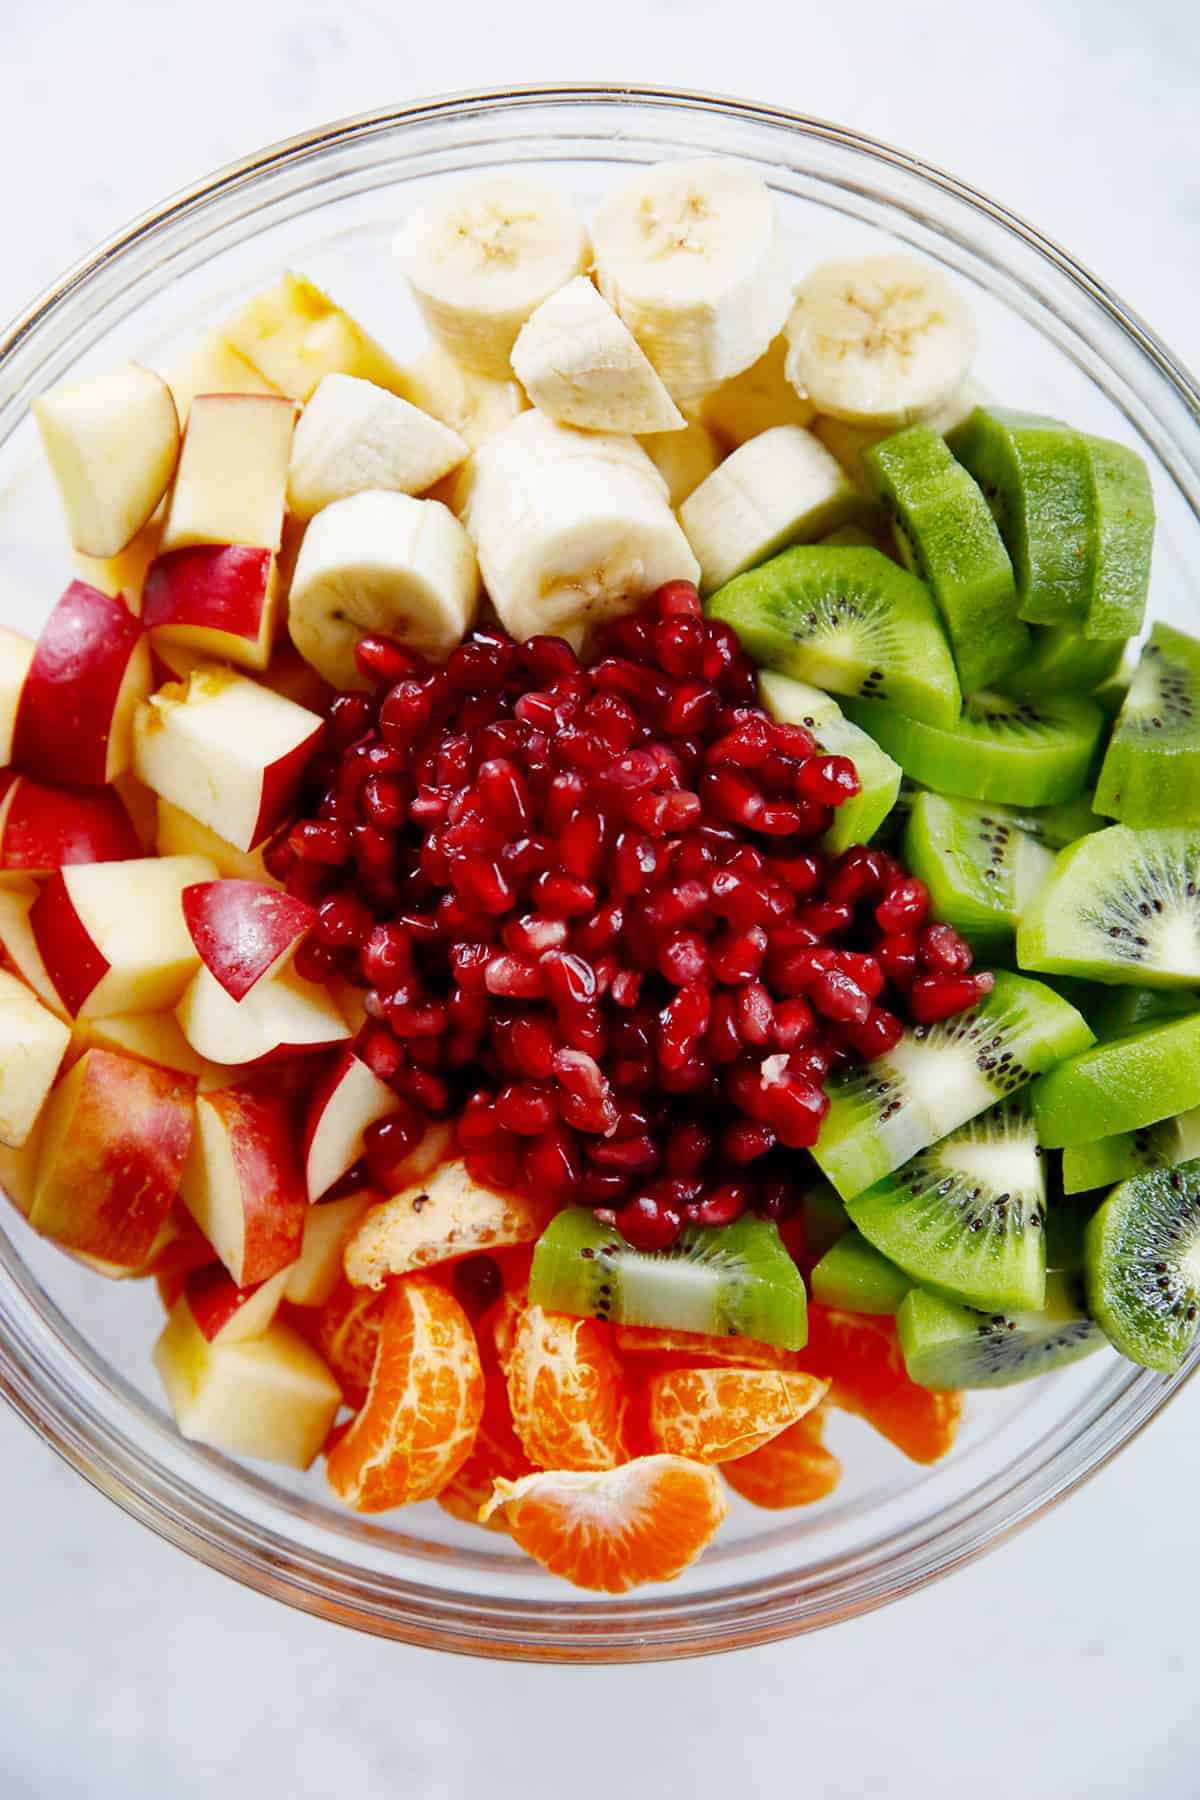 Winter fruit salad with pomegranate, kiwi, banana, apples and clementines.